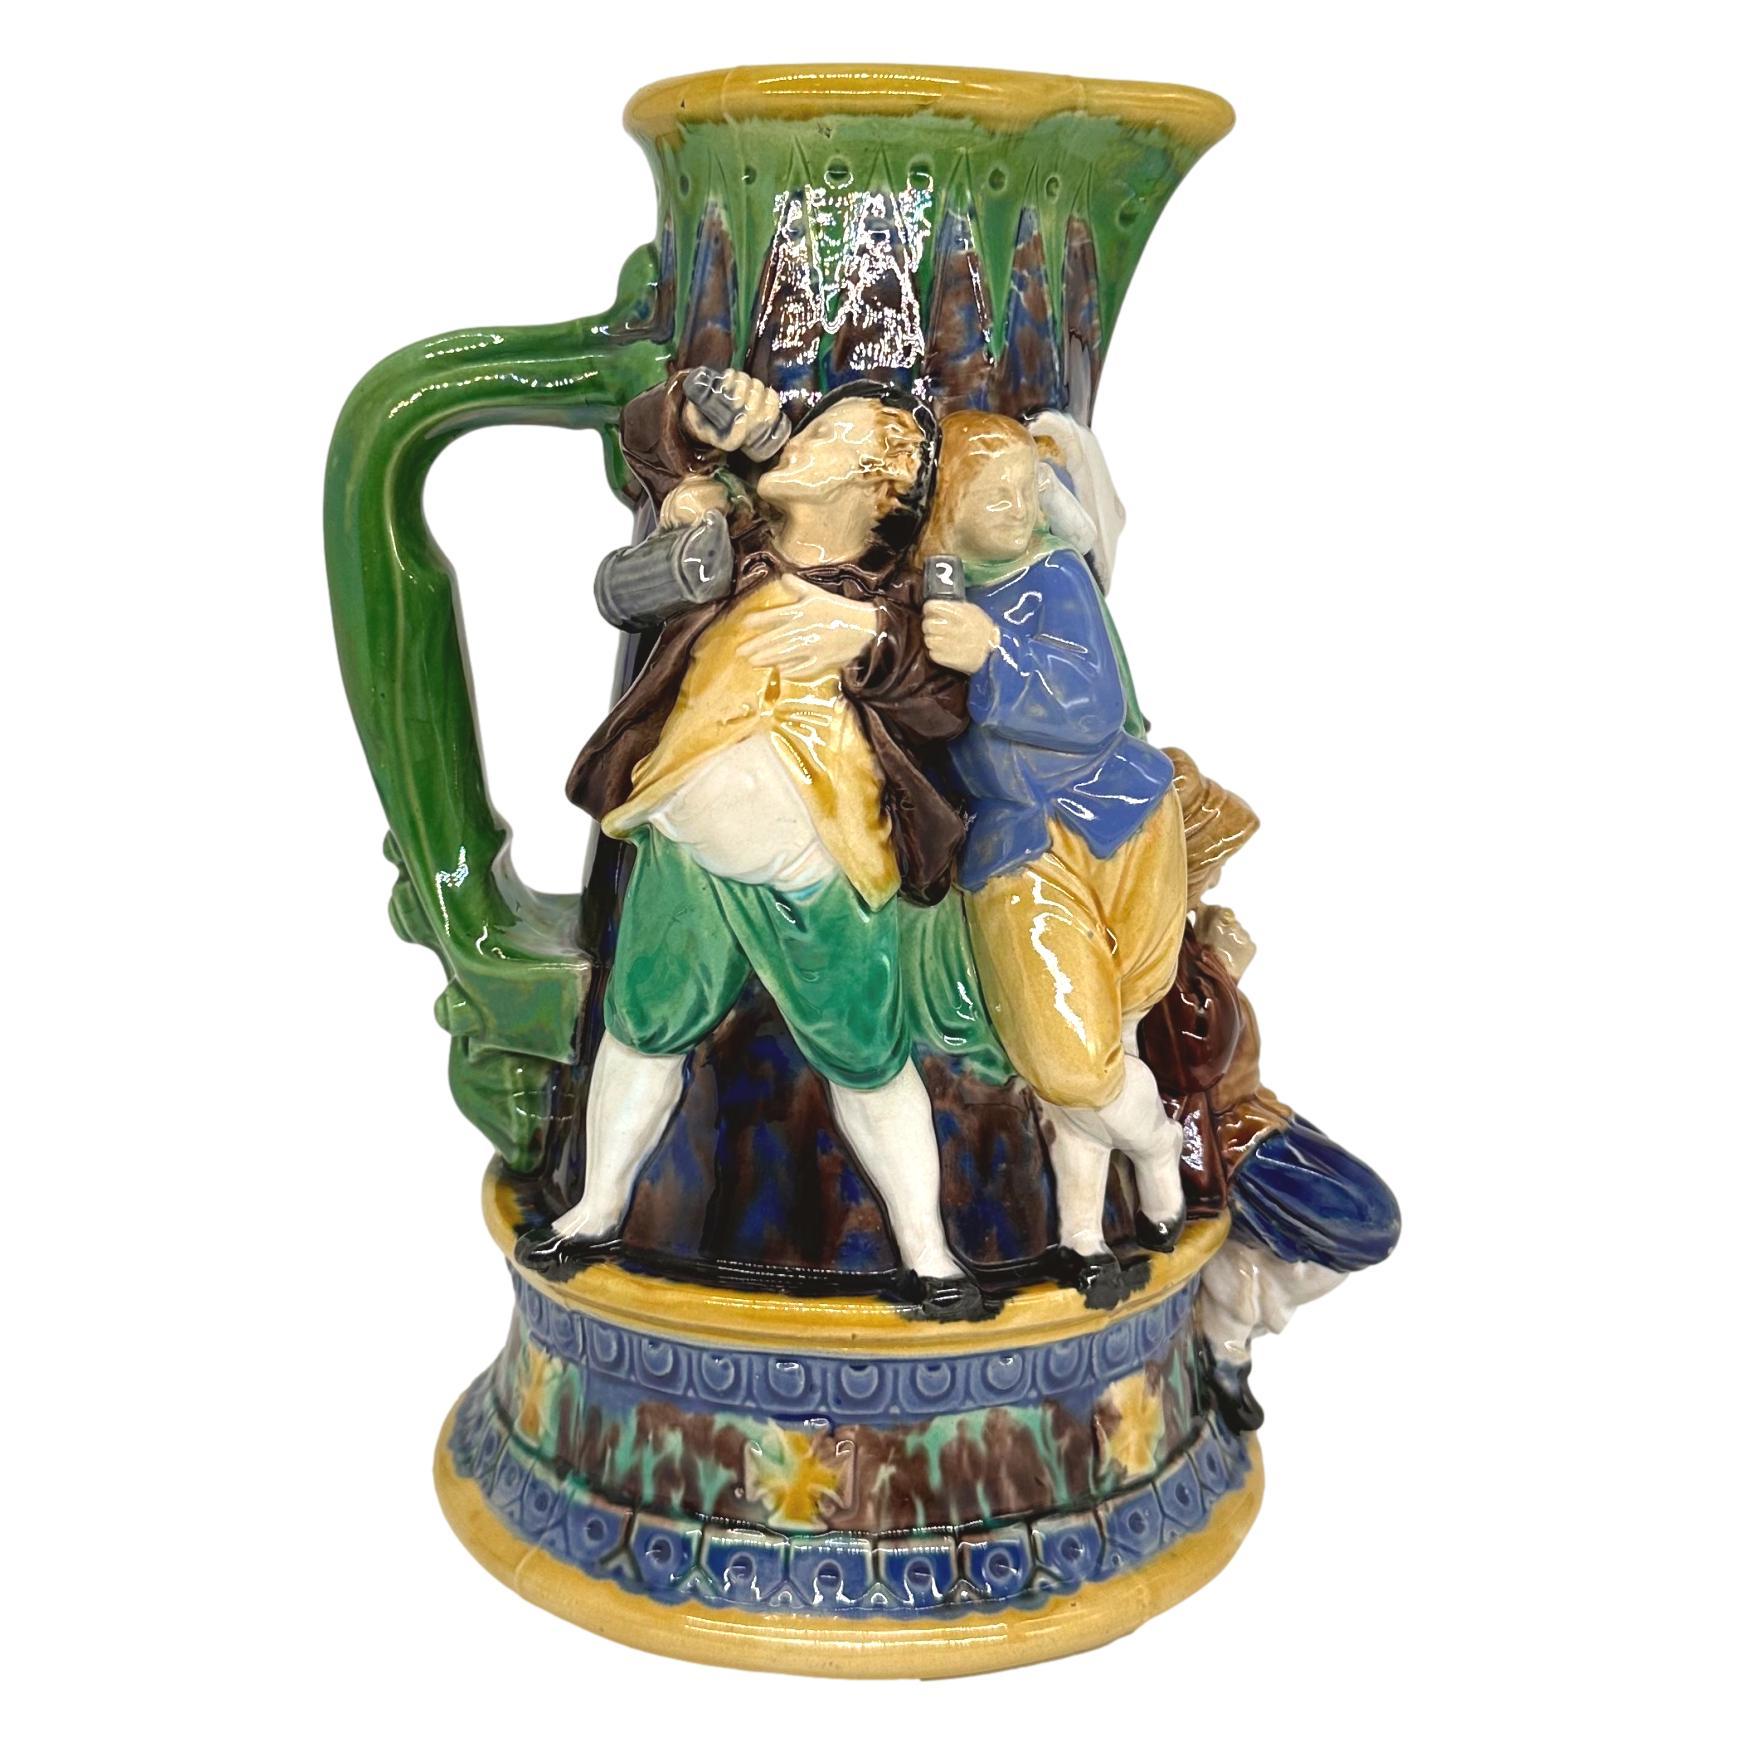 An Early Minton Majolica 'Tavern' Ale Jug, formed as a tapering medieval flagon, the figures molded in high relief and applied, depicting a man and woman dancing, a seated figure with a pipe, and two drunk men on a cobalt blue and brown mottled